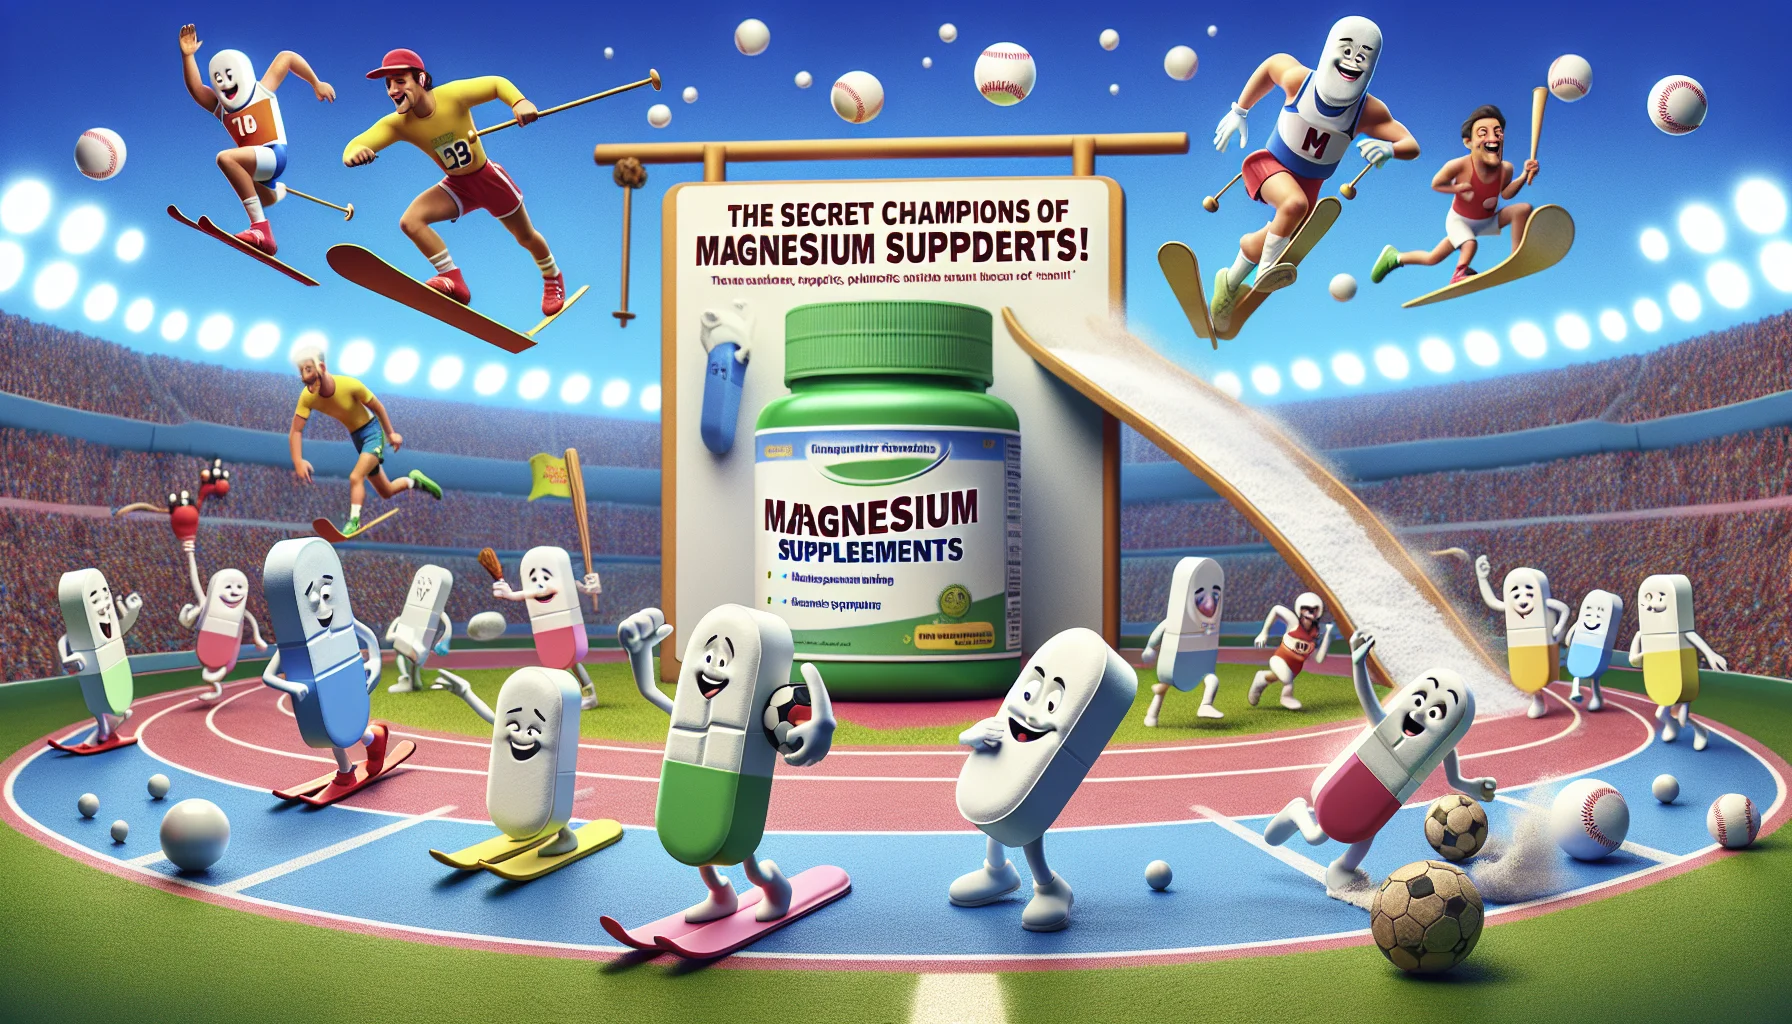 Imagine a whimsical scenario of magnesium supplement tablets, personified, participating in various sports activities to illustrate their benefits. They are sliding down a slope on skis, playing baseball, running a marathon with a humorous twist. The background is a vibrant sports field, full of energy and excitement. On the forefront, there's a sign that says 'The Secret Champions of Sports - Magnesium Supplements!'. Remember, the magnesium supplements should look comical and friendly to make the scene more enticing.